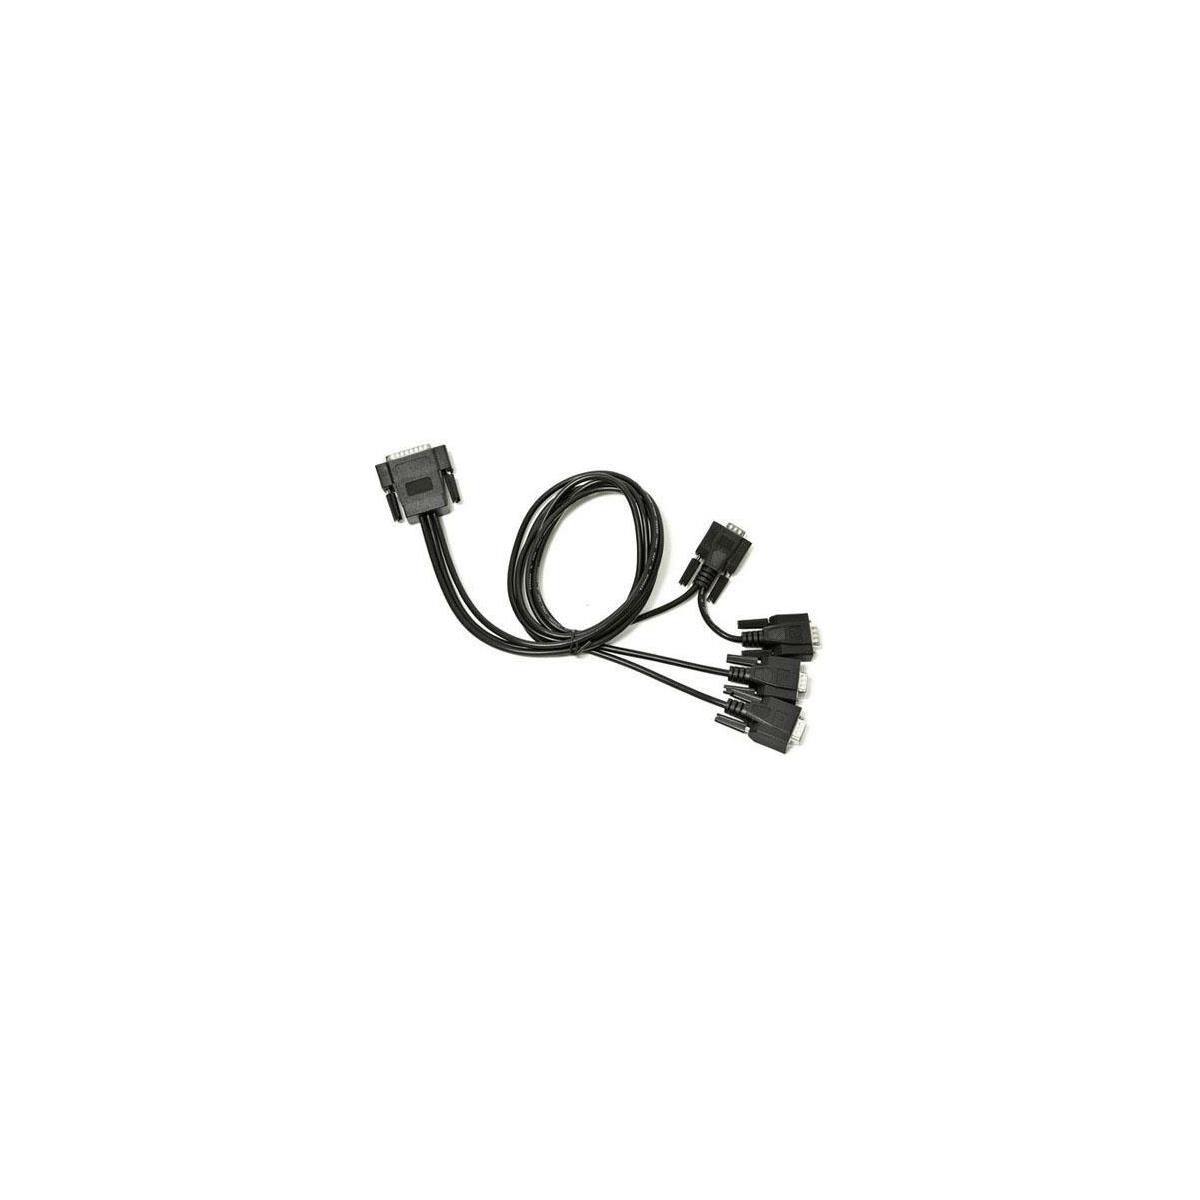 Image of Datavideo CB-28 Tally Cable for SE-3000 Switcher &amp; ITC-100 Intercom/Tally System